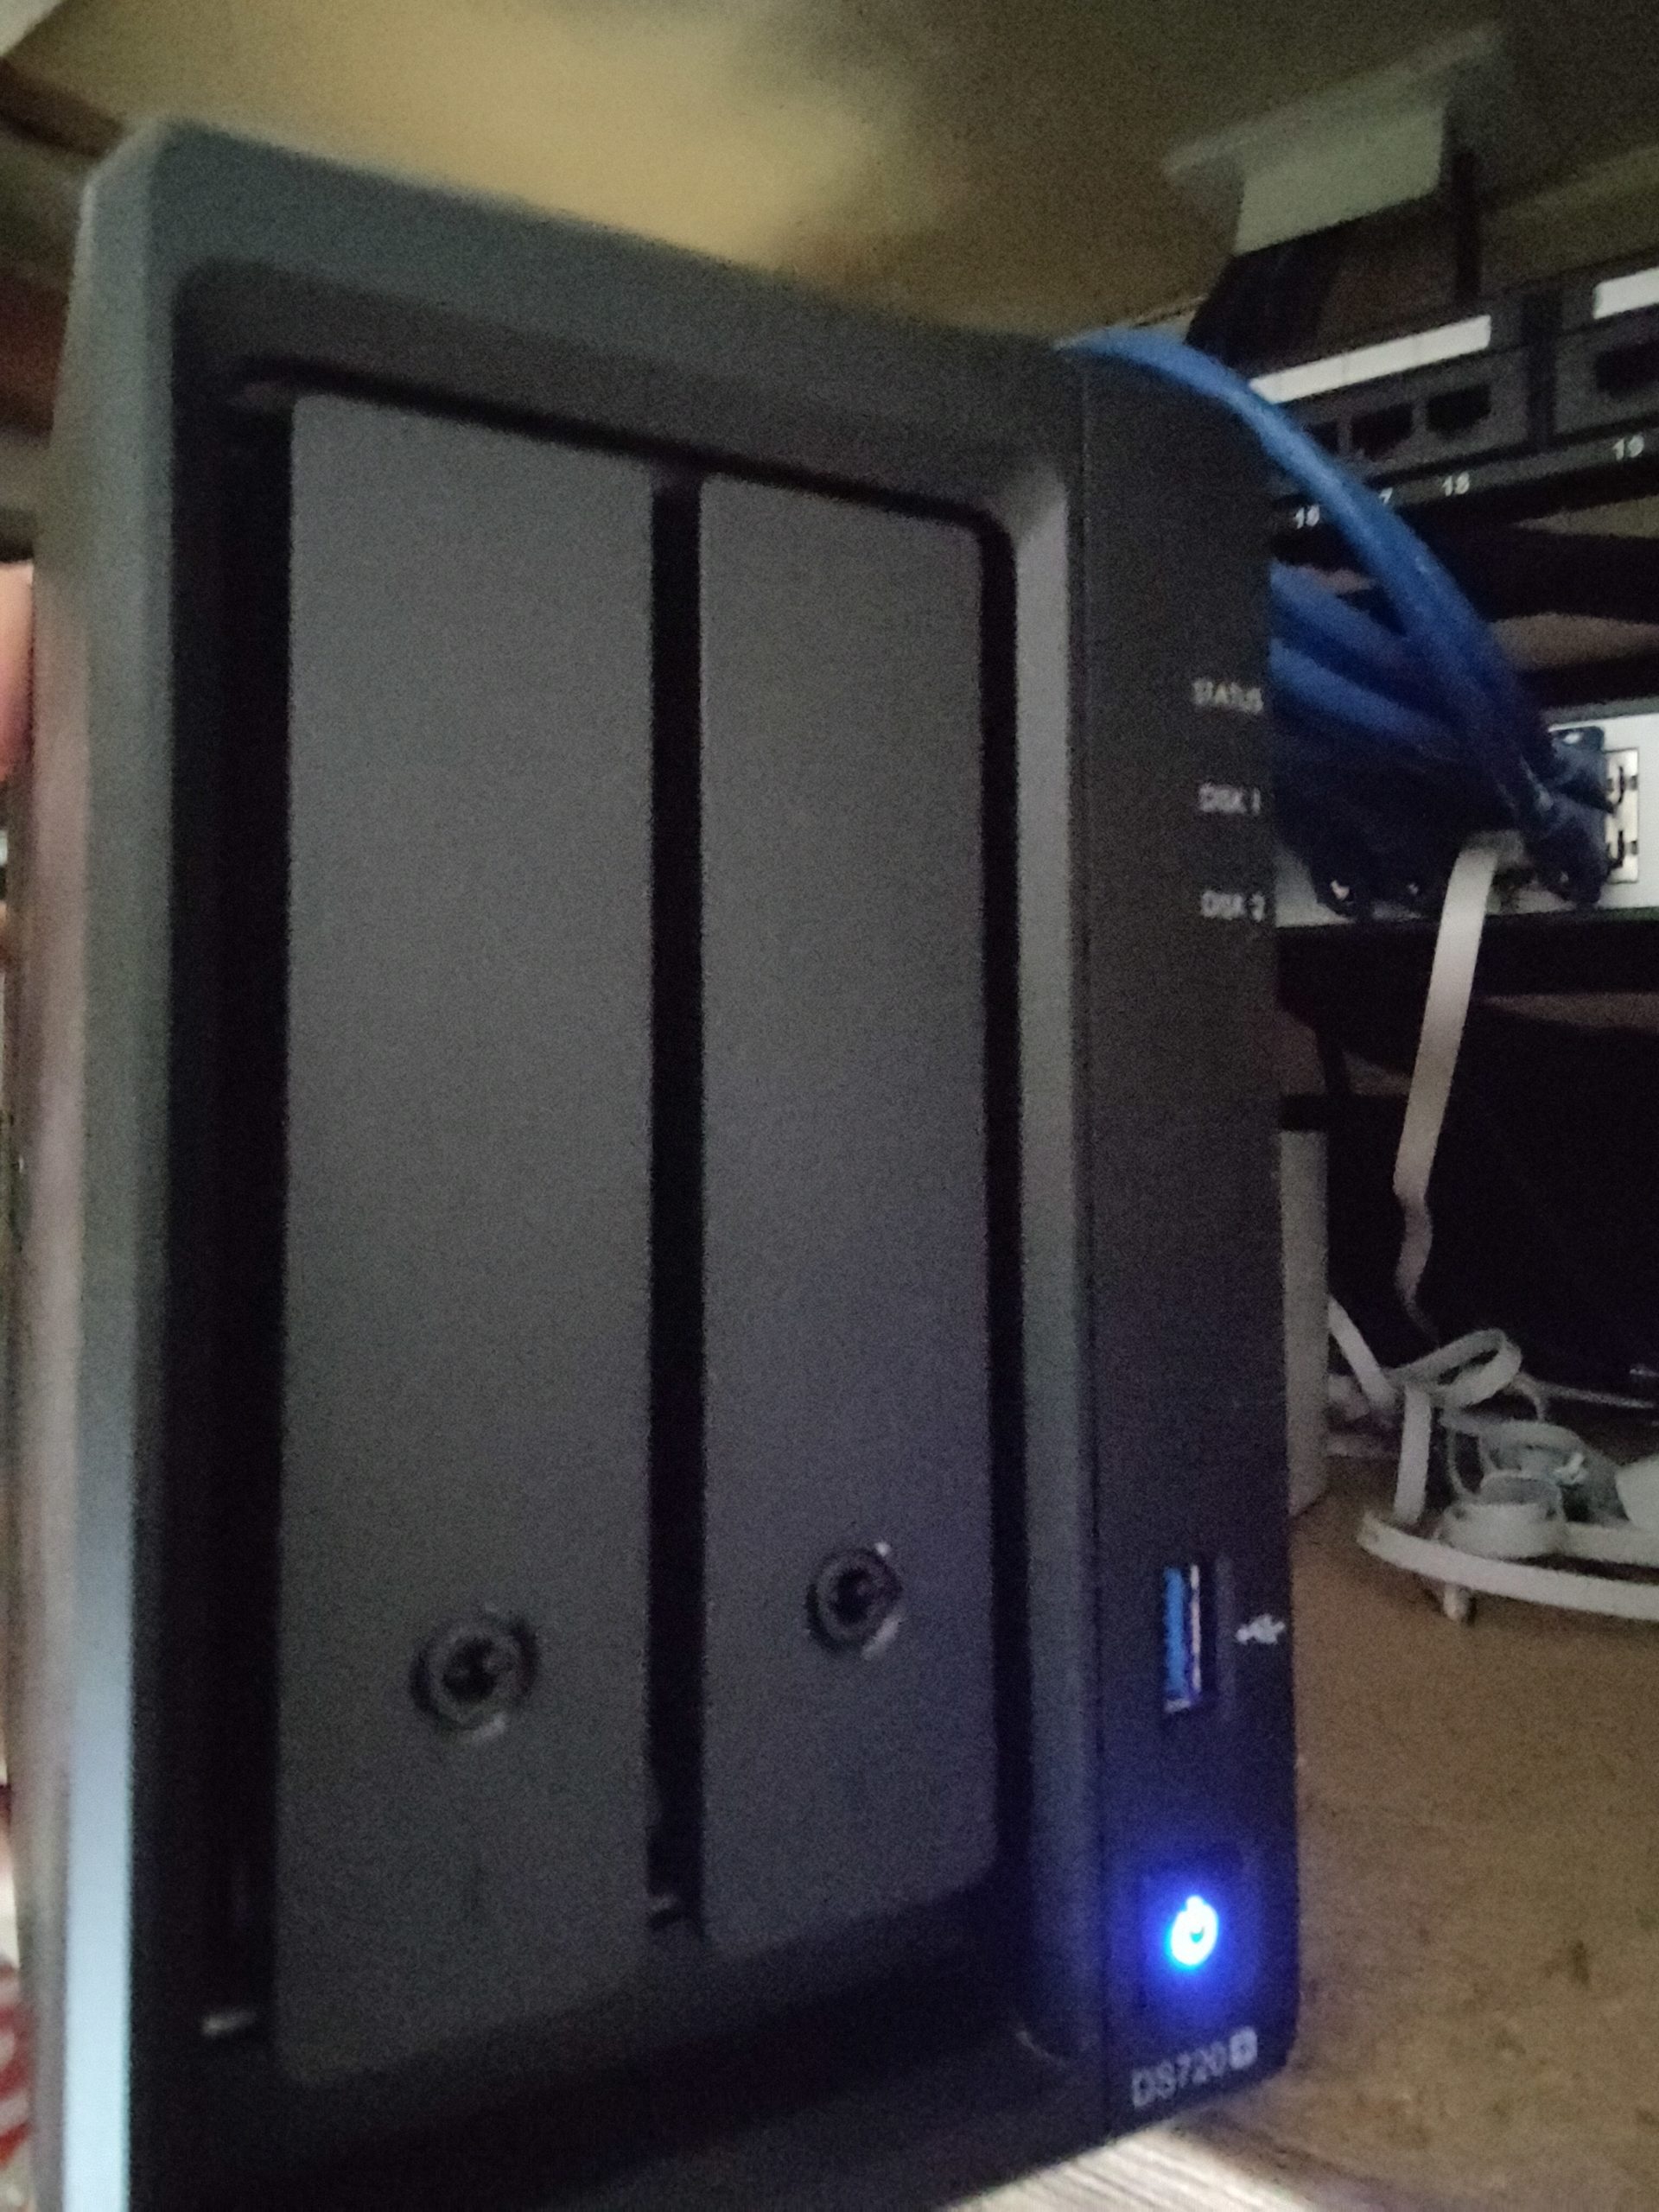 Synology DS720 in rack scaled